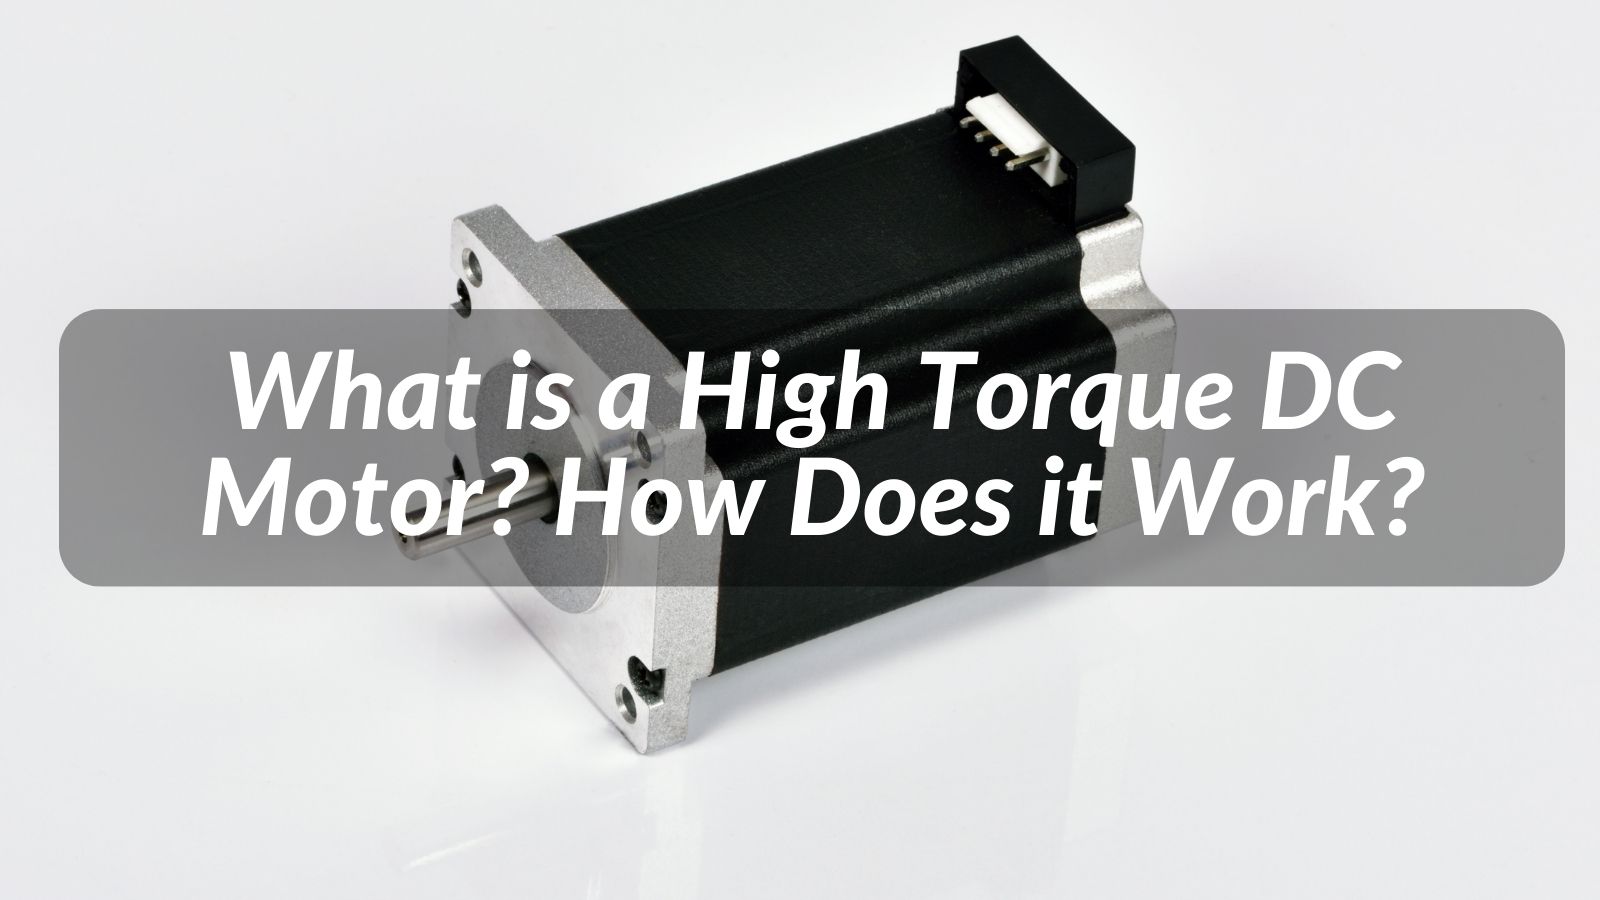 What is a High Torque DC Motor? How Does it Work?